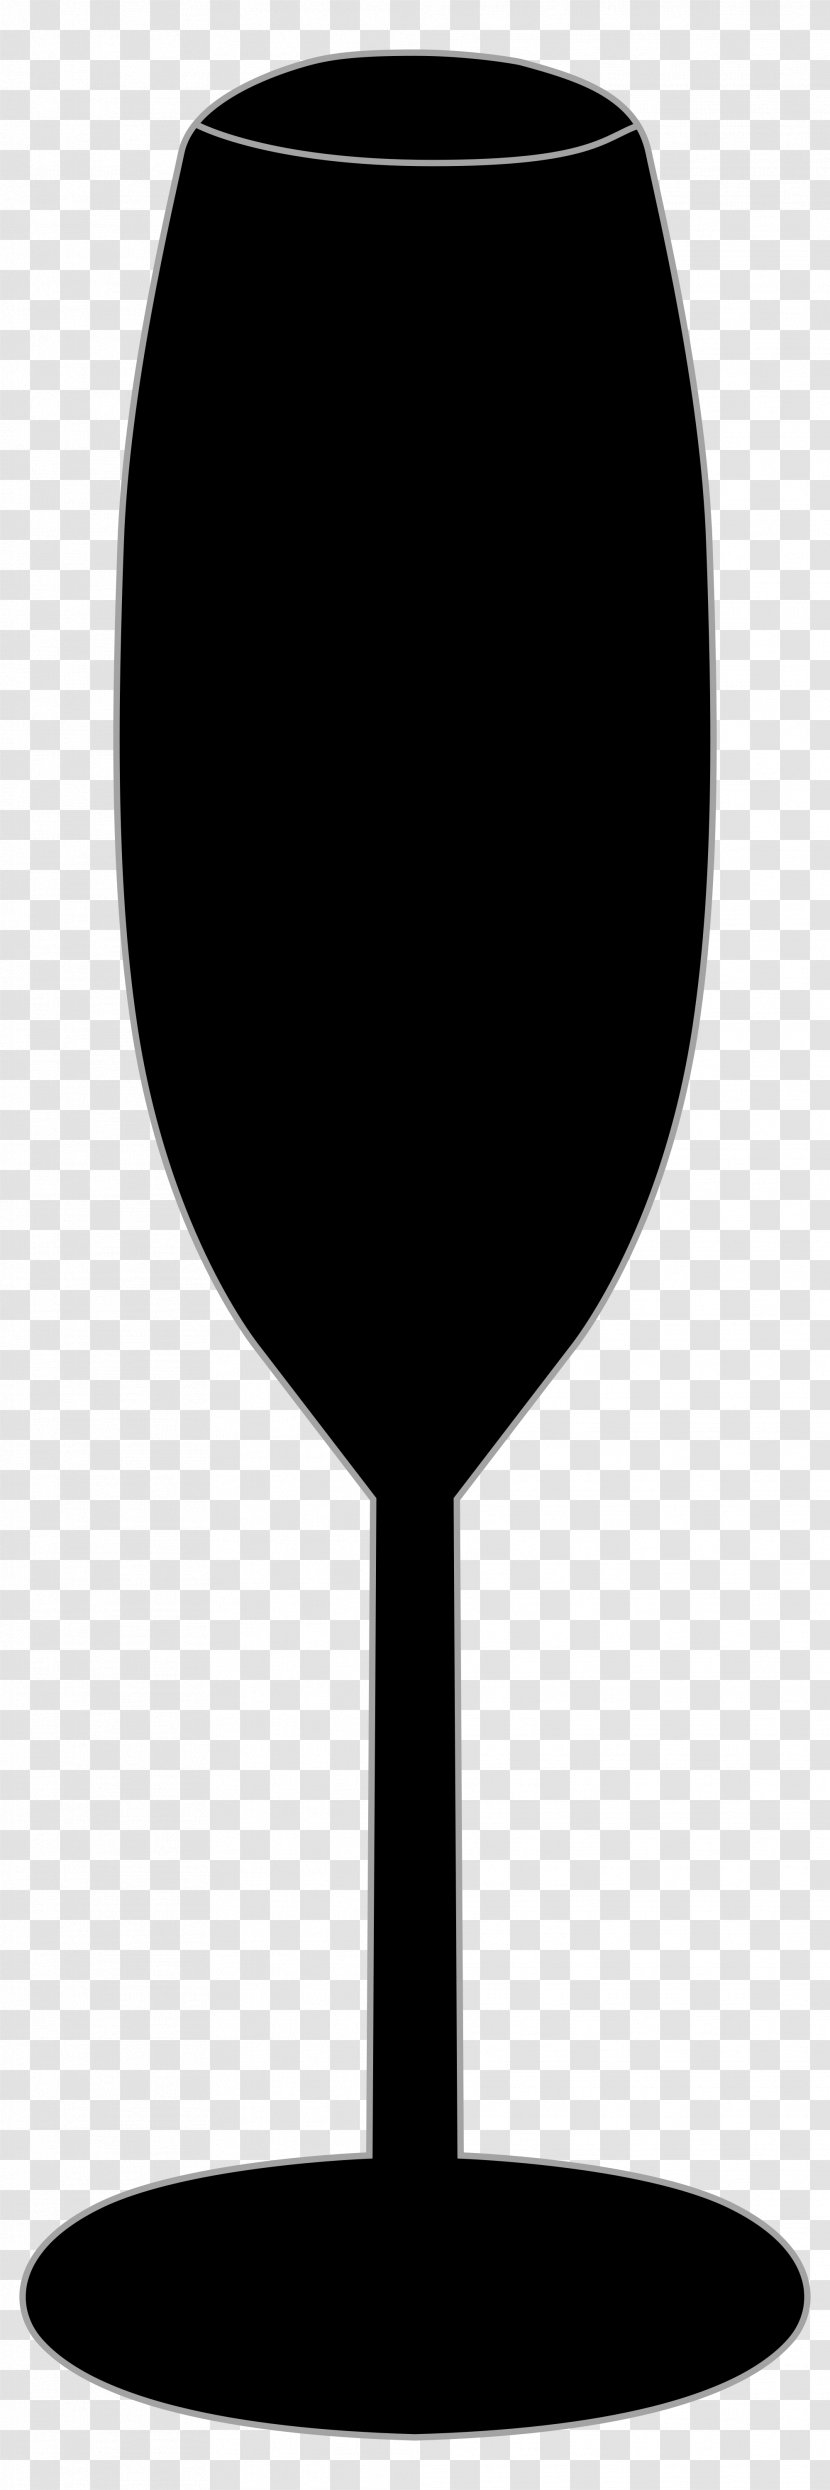 Wine Glass Stemware Champagne Table-glass - Old Fashioned Transparent PNG